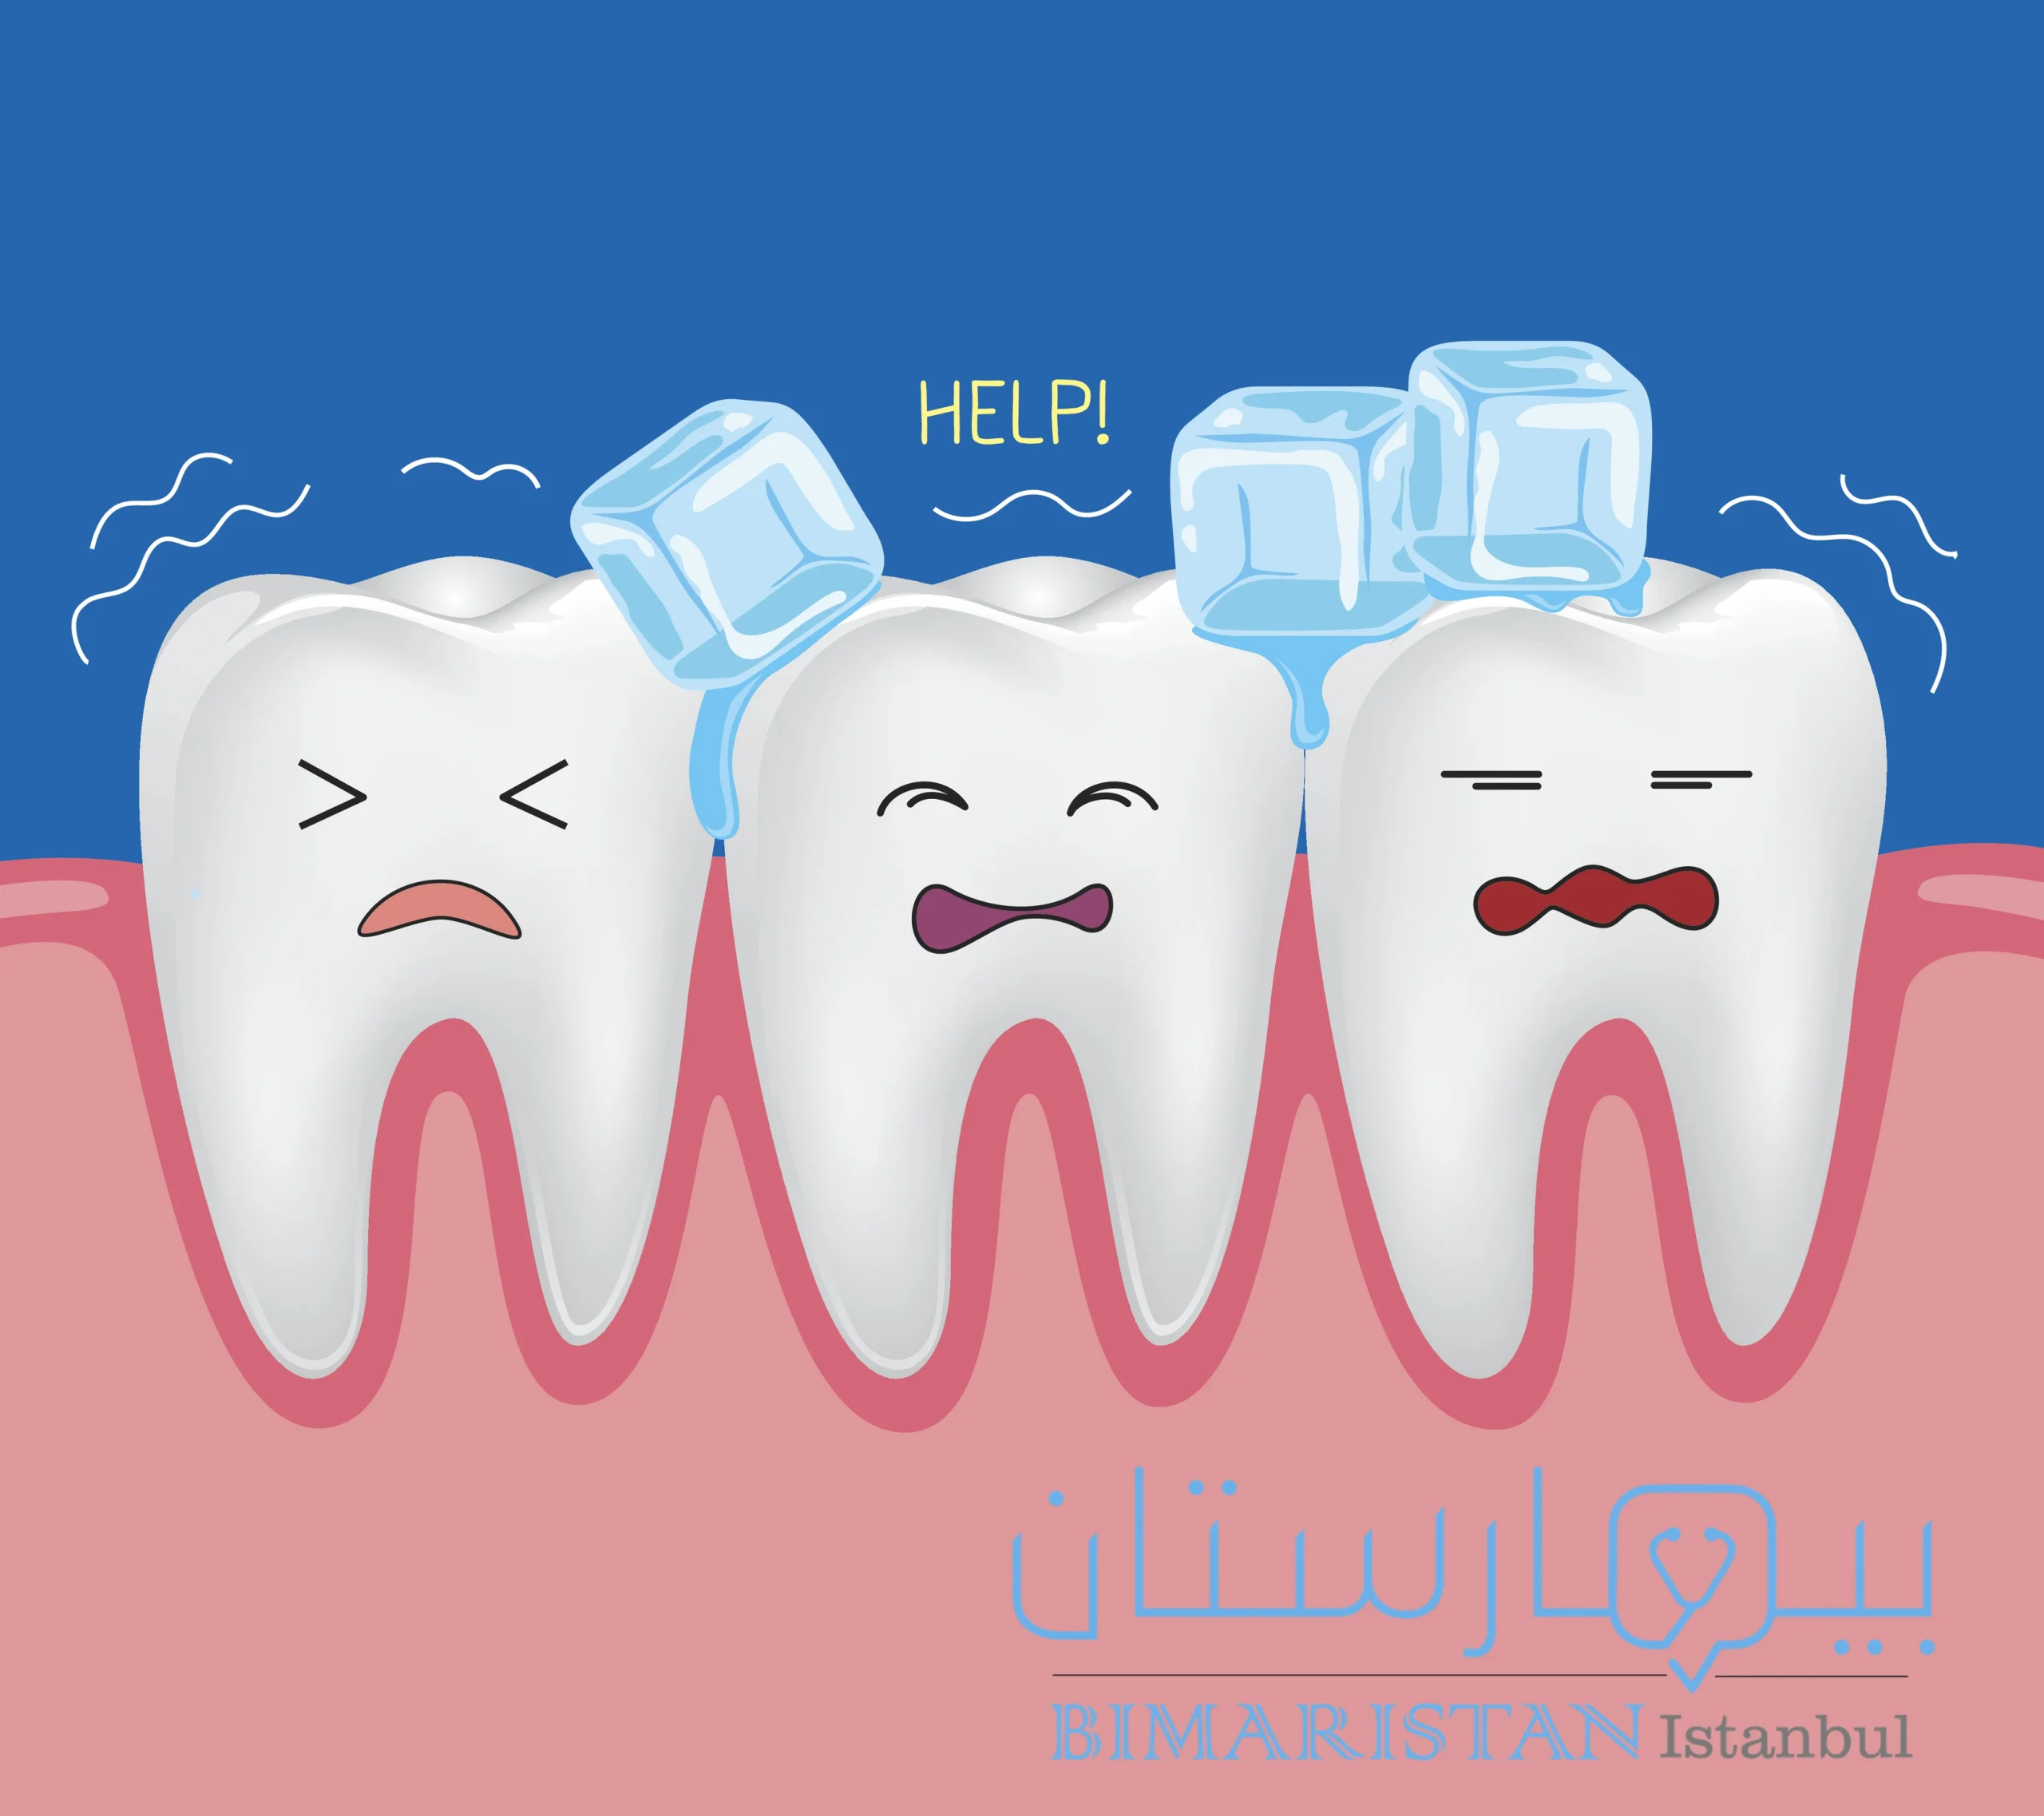 To be able to treat tooth sensitivity, it is useful to know the causes of its occurrence